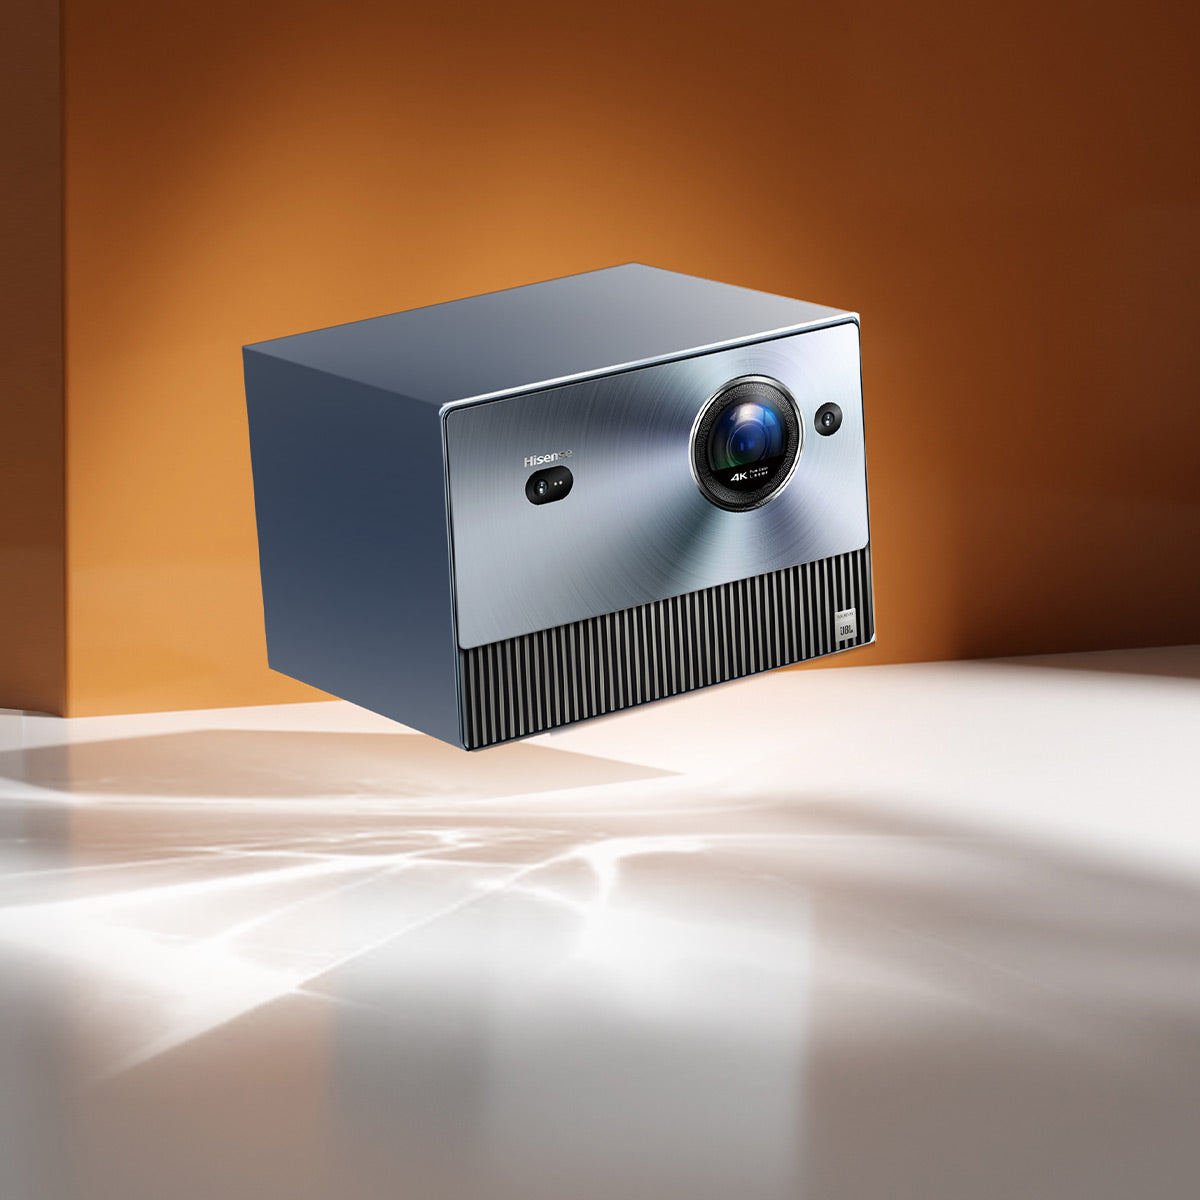 Hisense C1: a small 4K Dolby Vision projector that's sure to